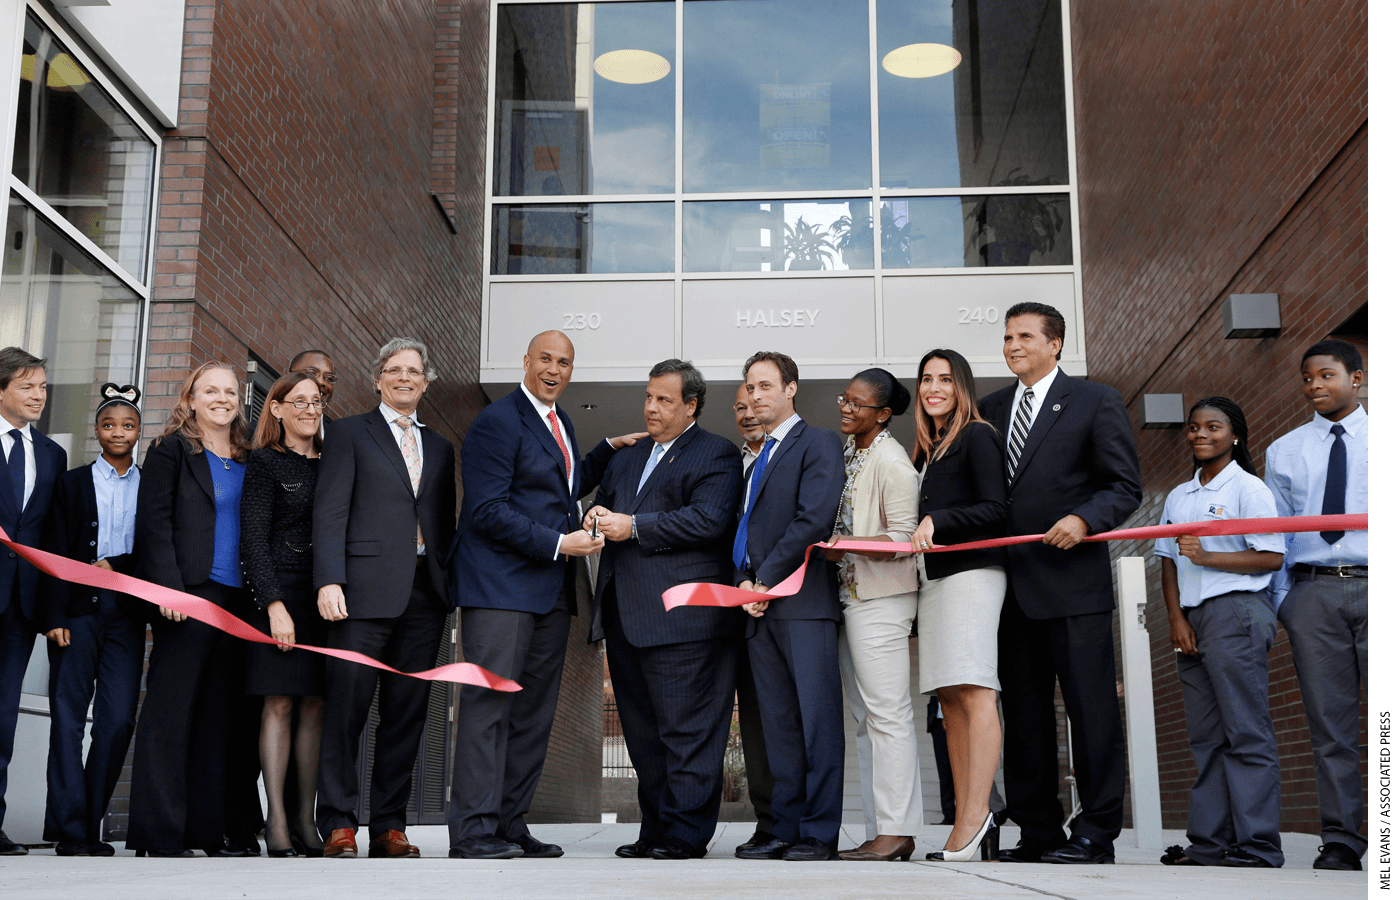 Democratic Newark Mayor and senate candidate Cory Booker, center left and Republican New Jersey Gov. Chris Christie, center right, joins others in Newark, N.J., Wednesday, Sept. 25, 2013, as they cut a ribbon during an opening ceremony for Newark charter schools.